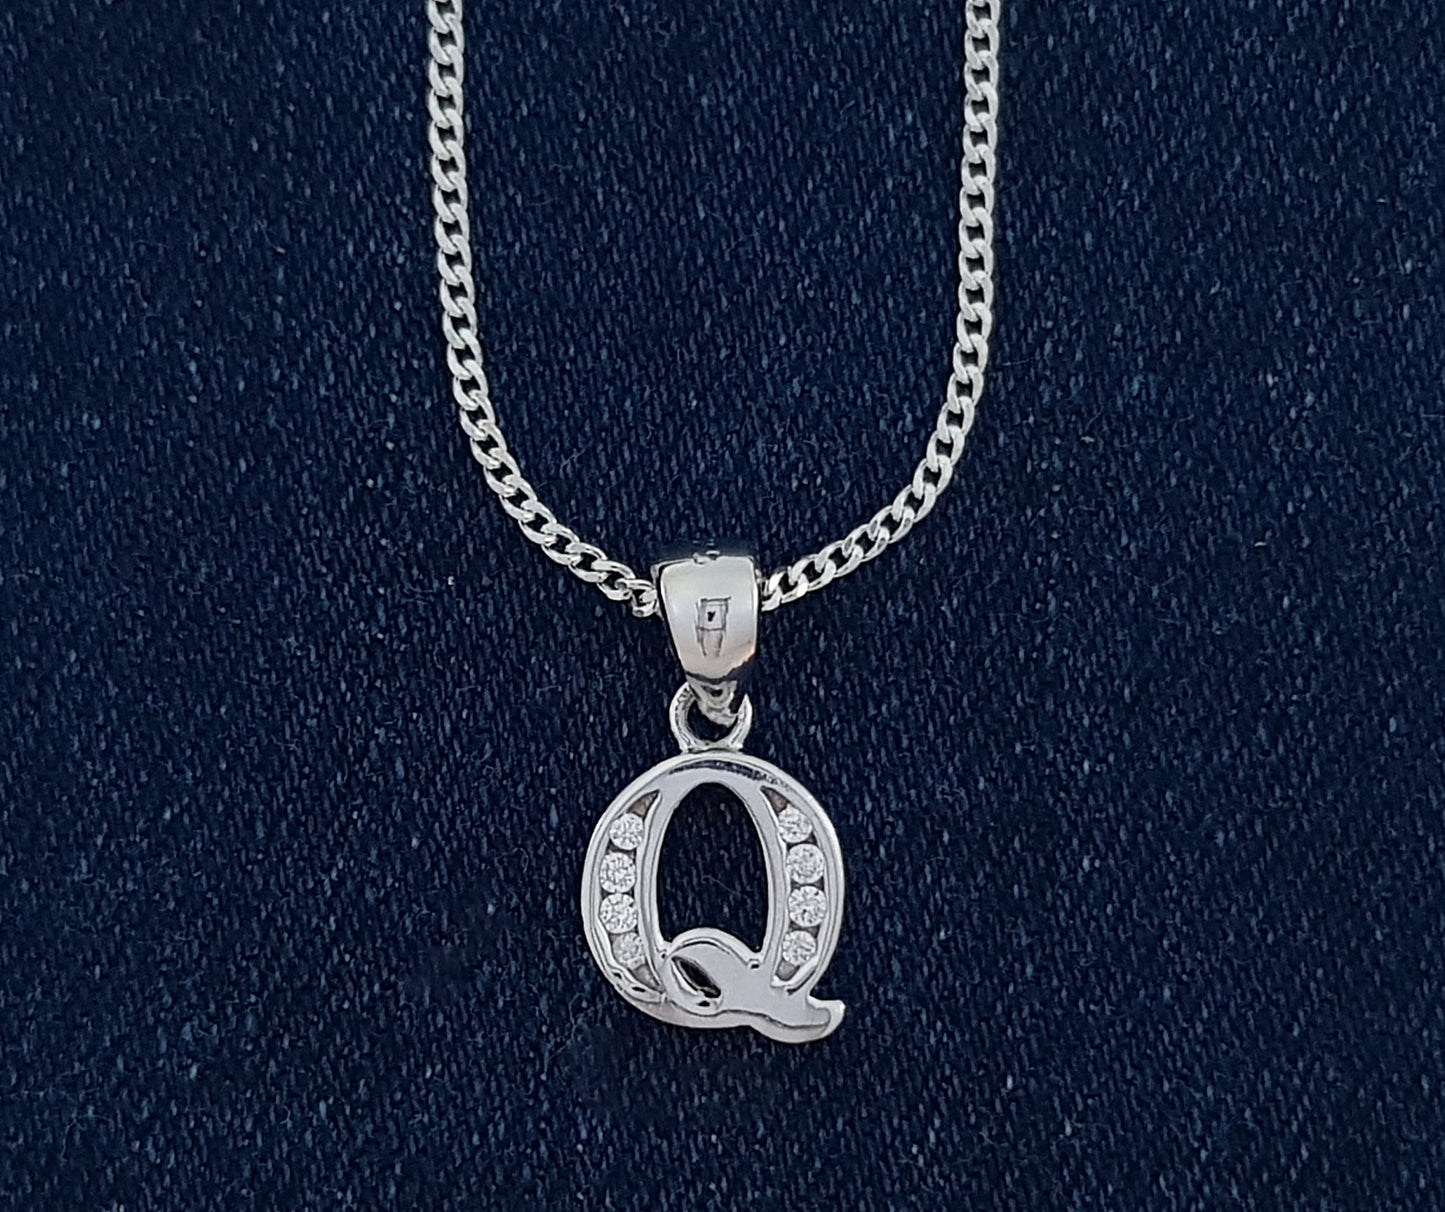 Sterling Silver Initial with Cubic Zirconia Stones- "Q" Initial or Letter